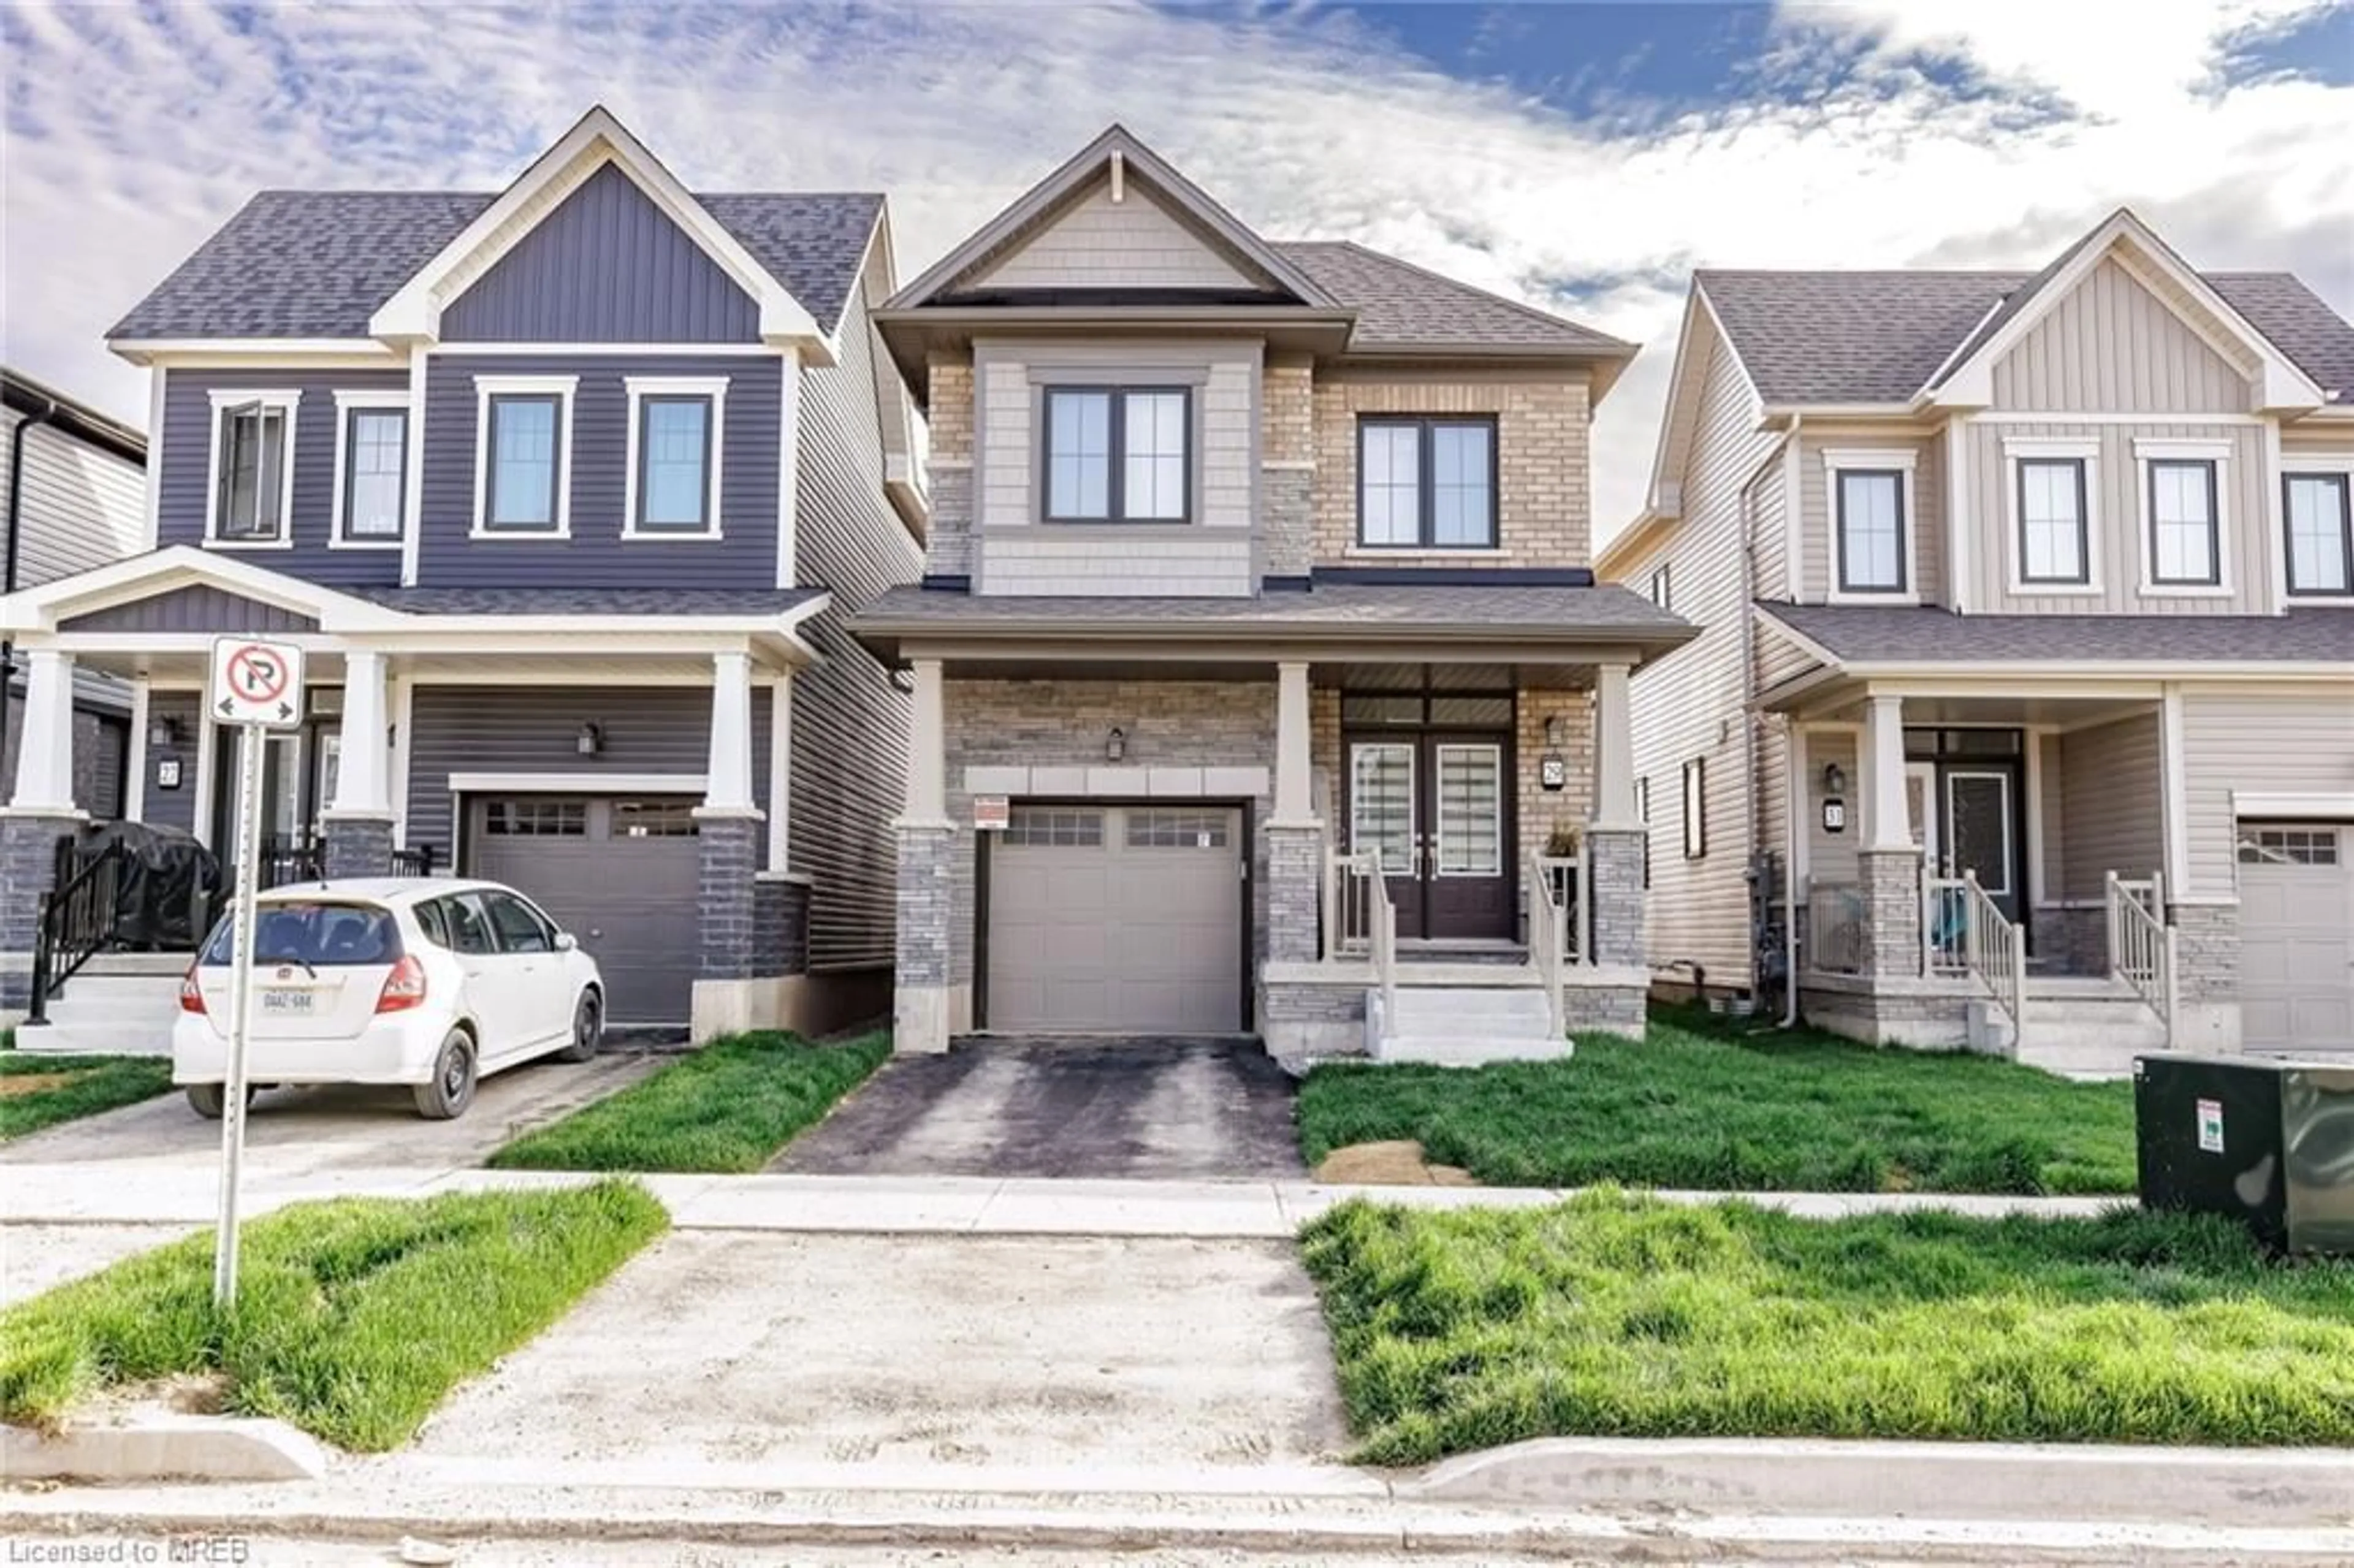 Frontside or backside of a home for 29 Monteith Dr, Brantford Ontario N3T 0W6